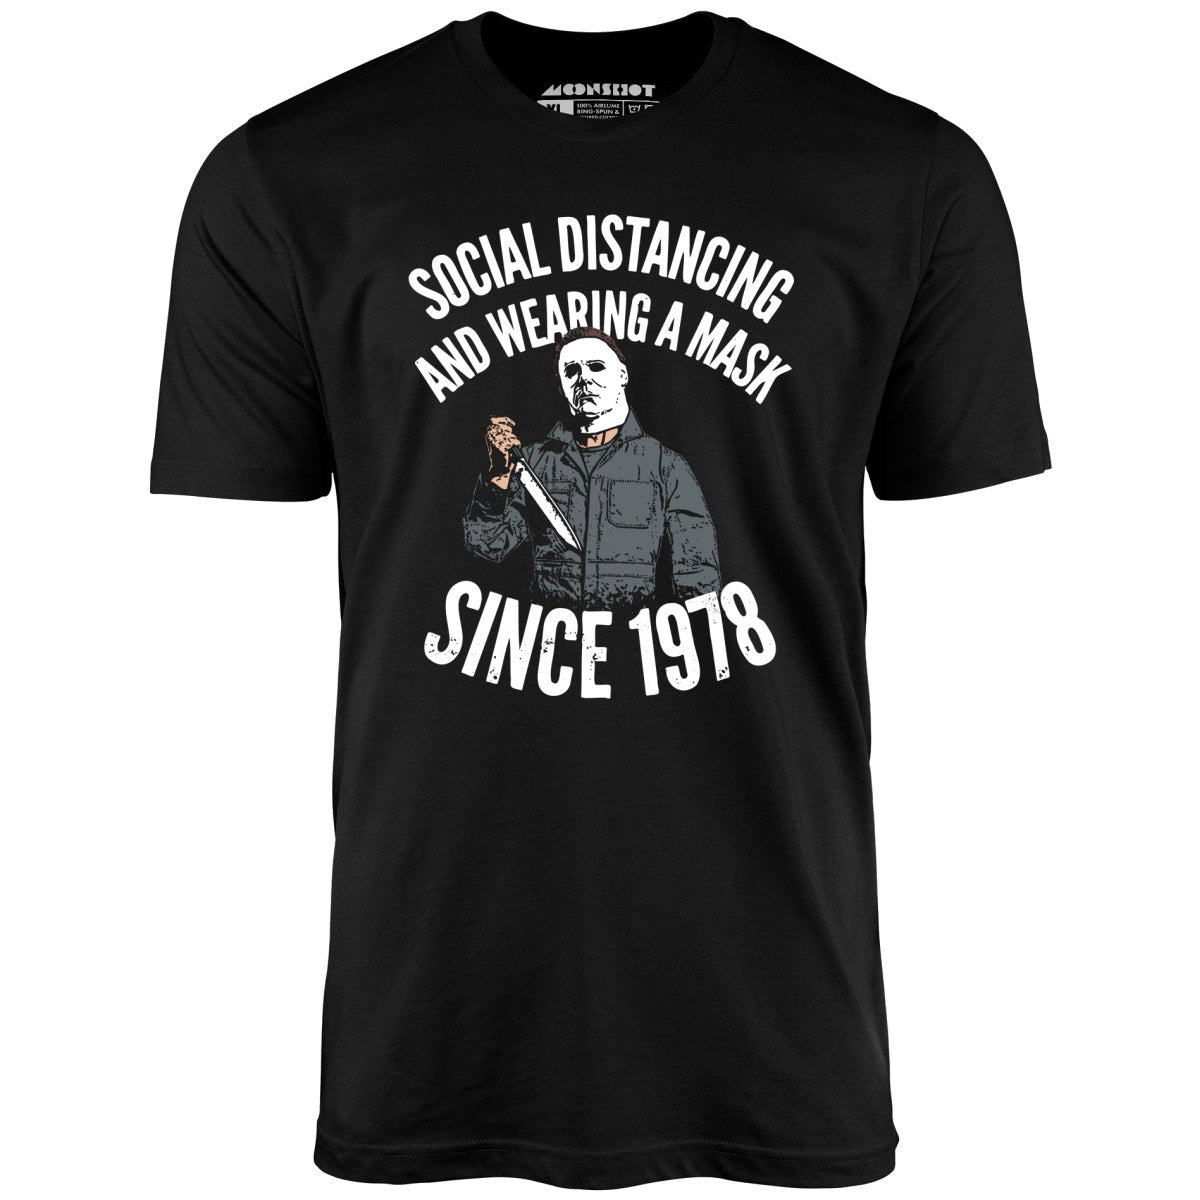 Social Distancing and Wearing a Mask Since 1978 - Unisex T-Shirt